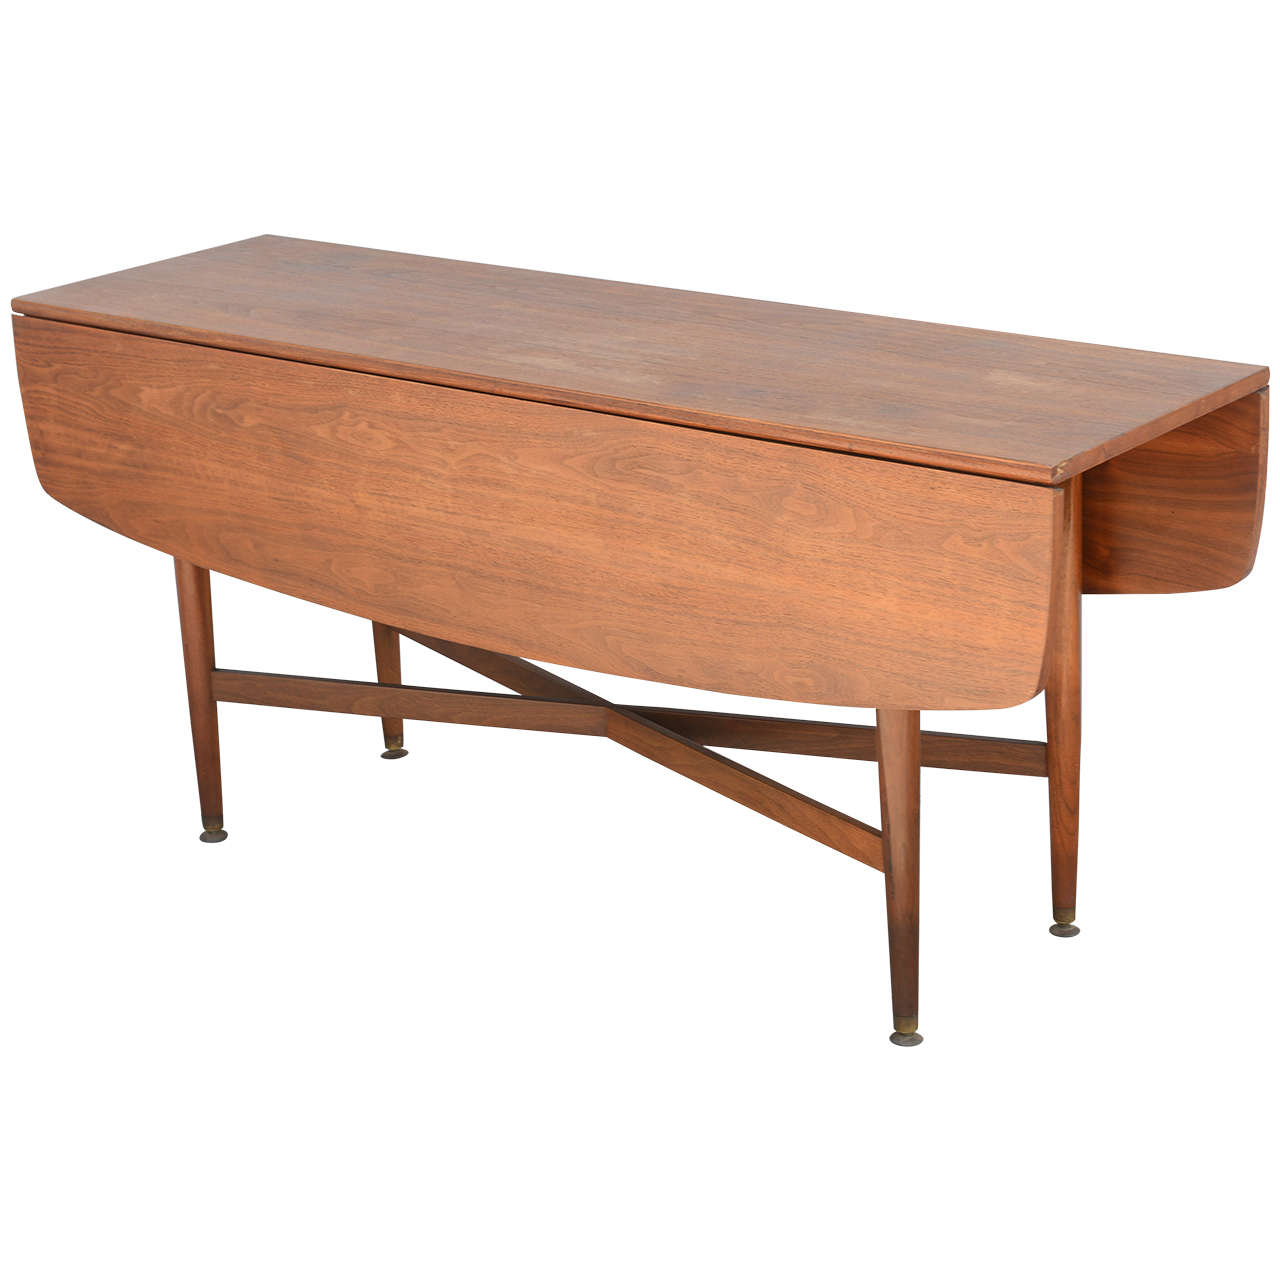 Teak Drop-Leaf Dining or Console Table Danish, 1960s at 1stdibs